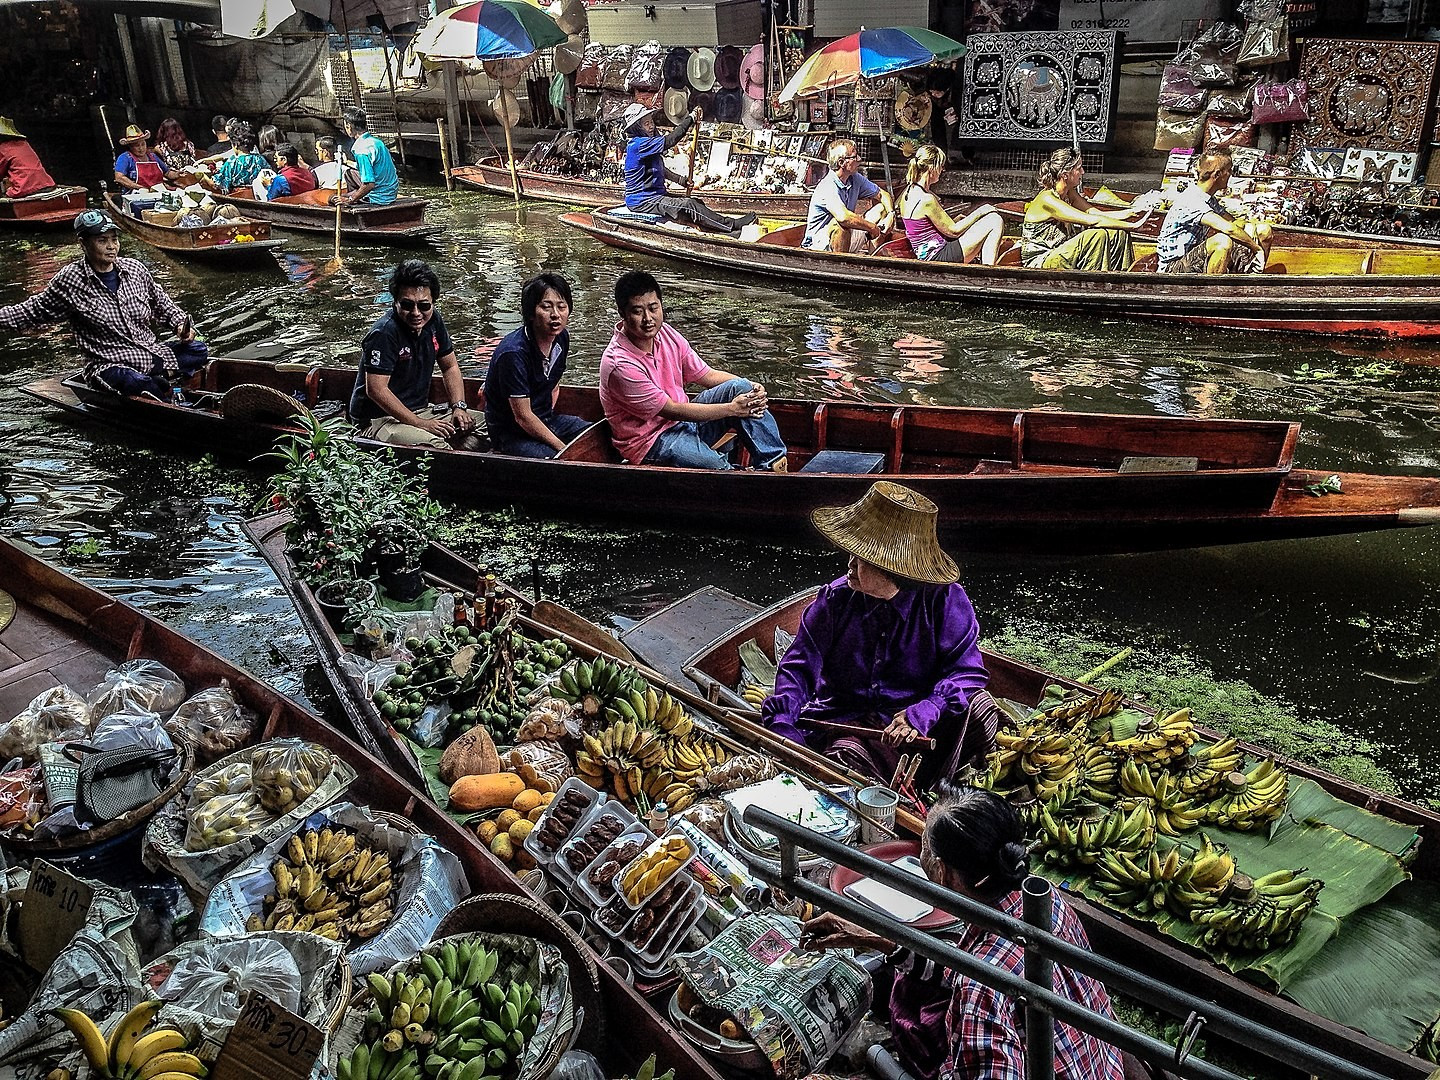 By Roberto Faccenda from Canale CN, Italy - understanding the "floating market", CC BY-SA 2.0, https://commons.wikimedia.org/w/index.php?curid=61364645